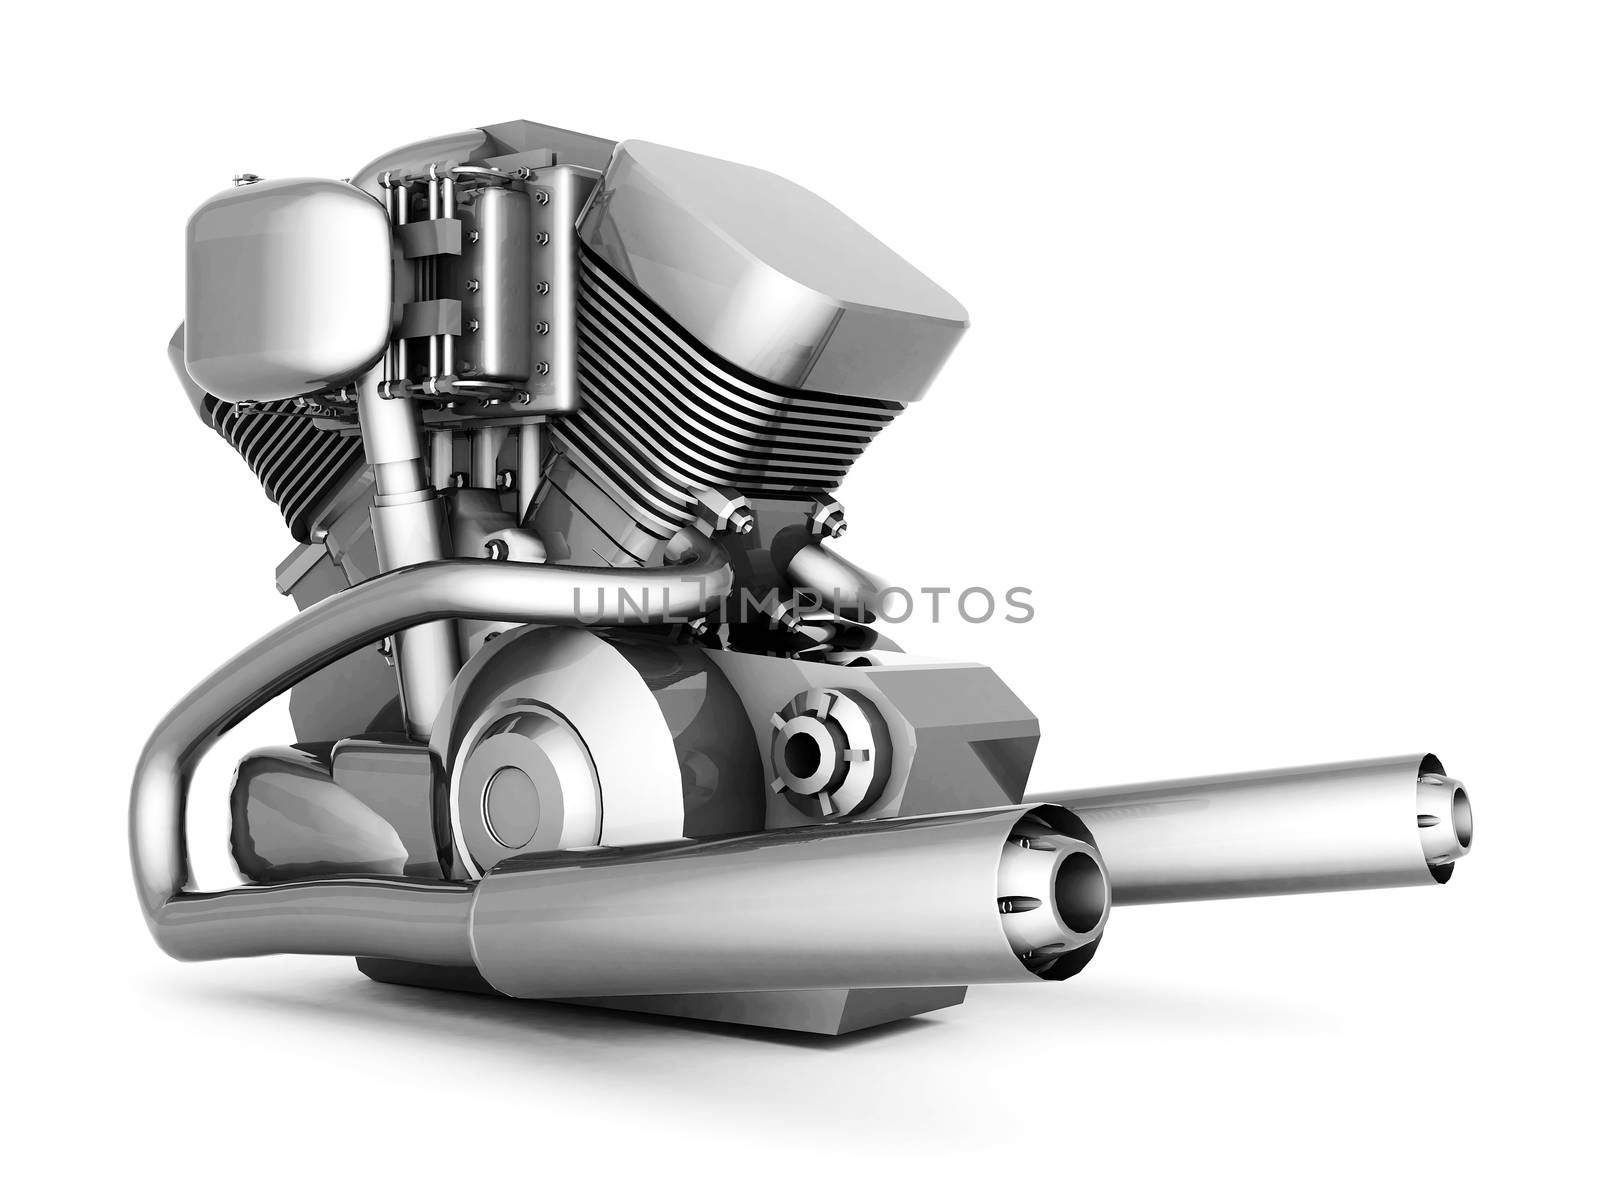 chromed motorcycle engine on a white background